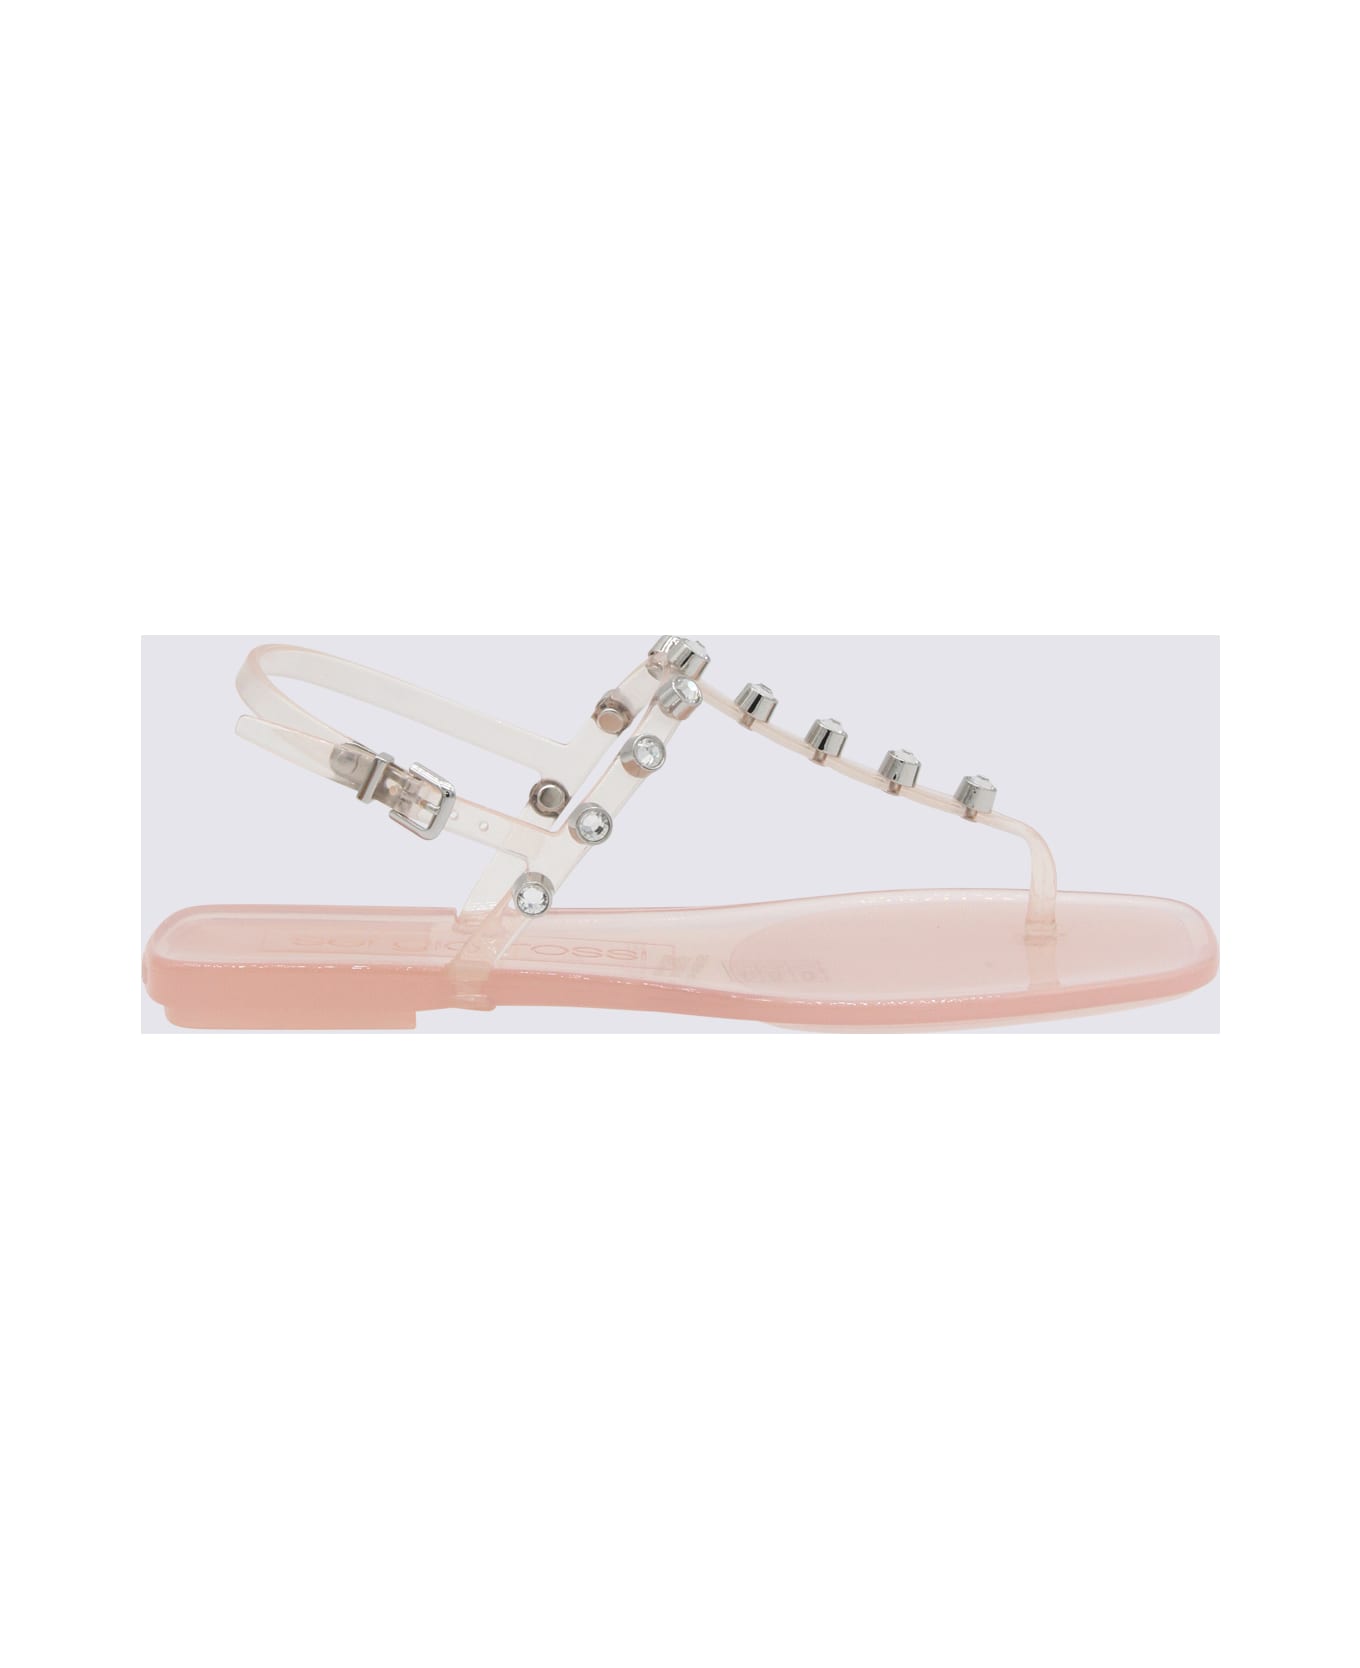 Sergio Rossi Powder Pink Rubber Sr1 Jelly Flats - Pink